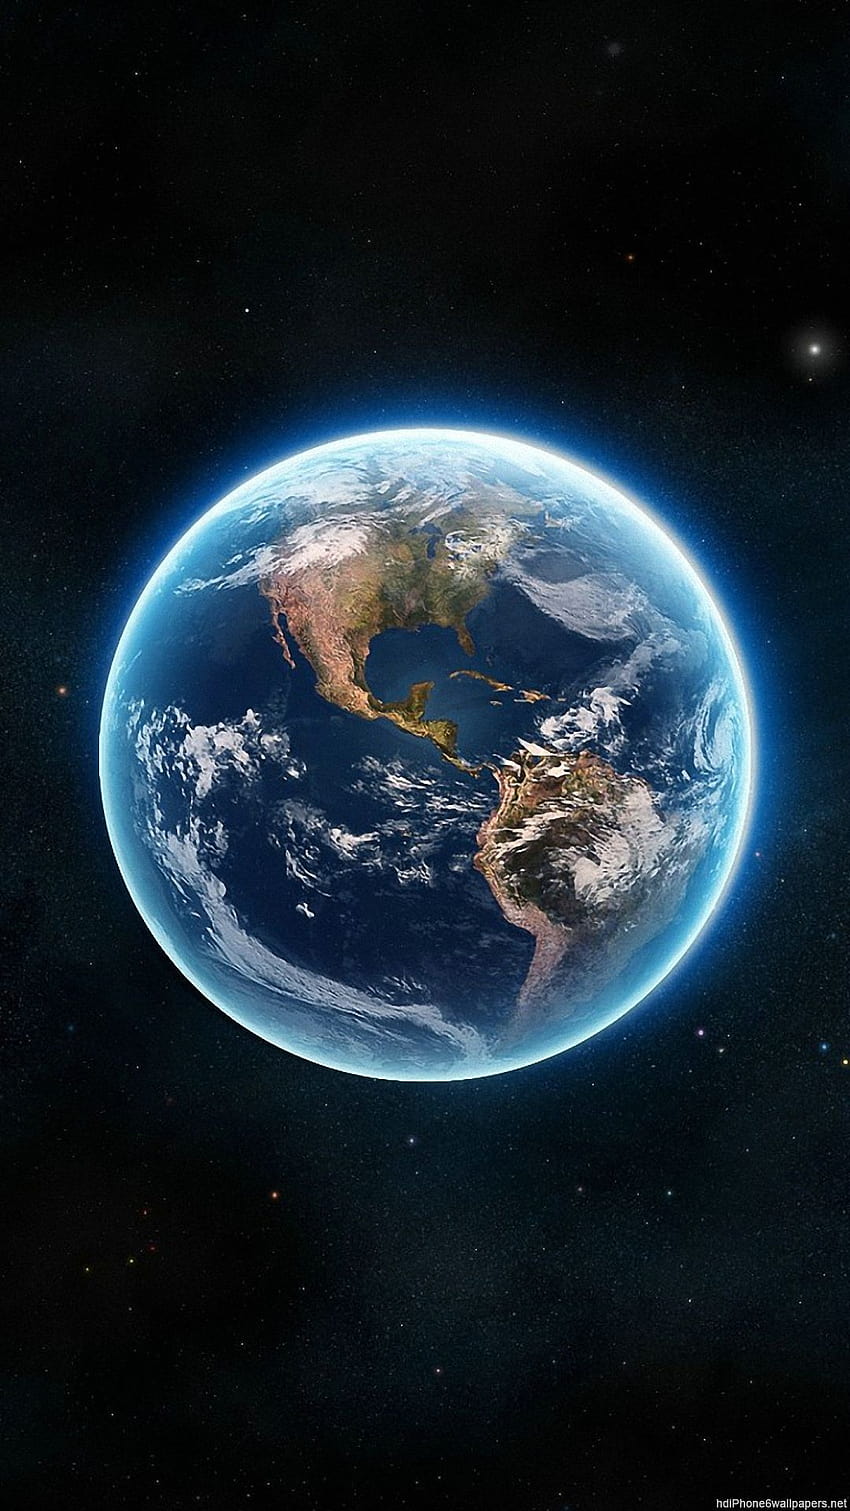 100+] 3d Earth Wallpapers | Wallpapers.com